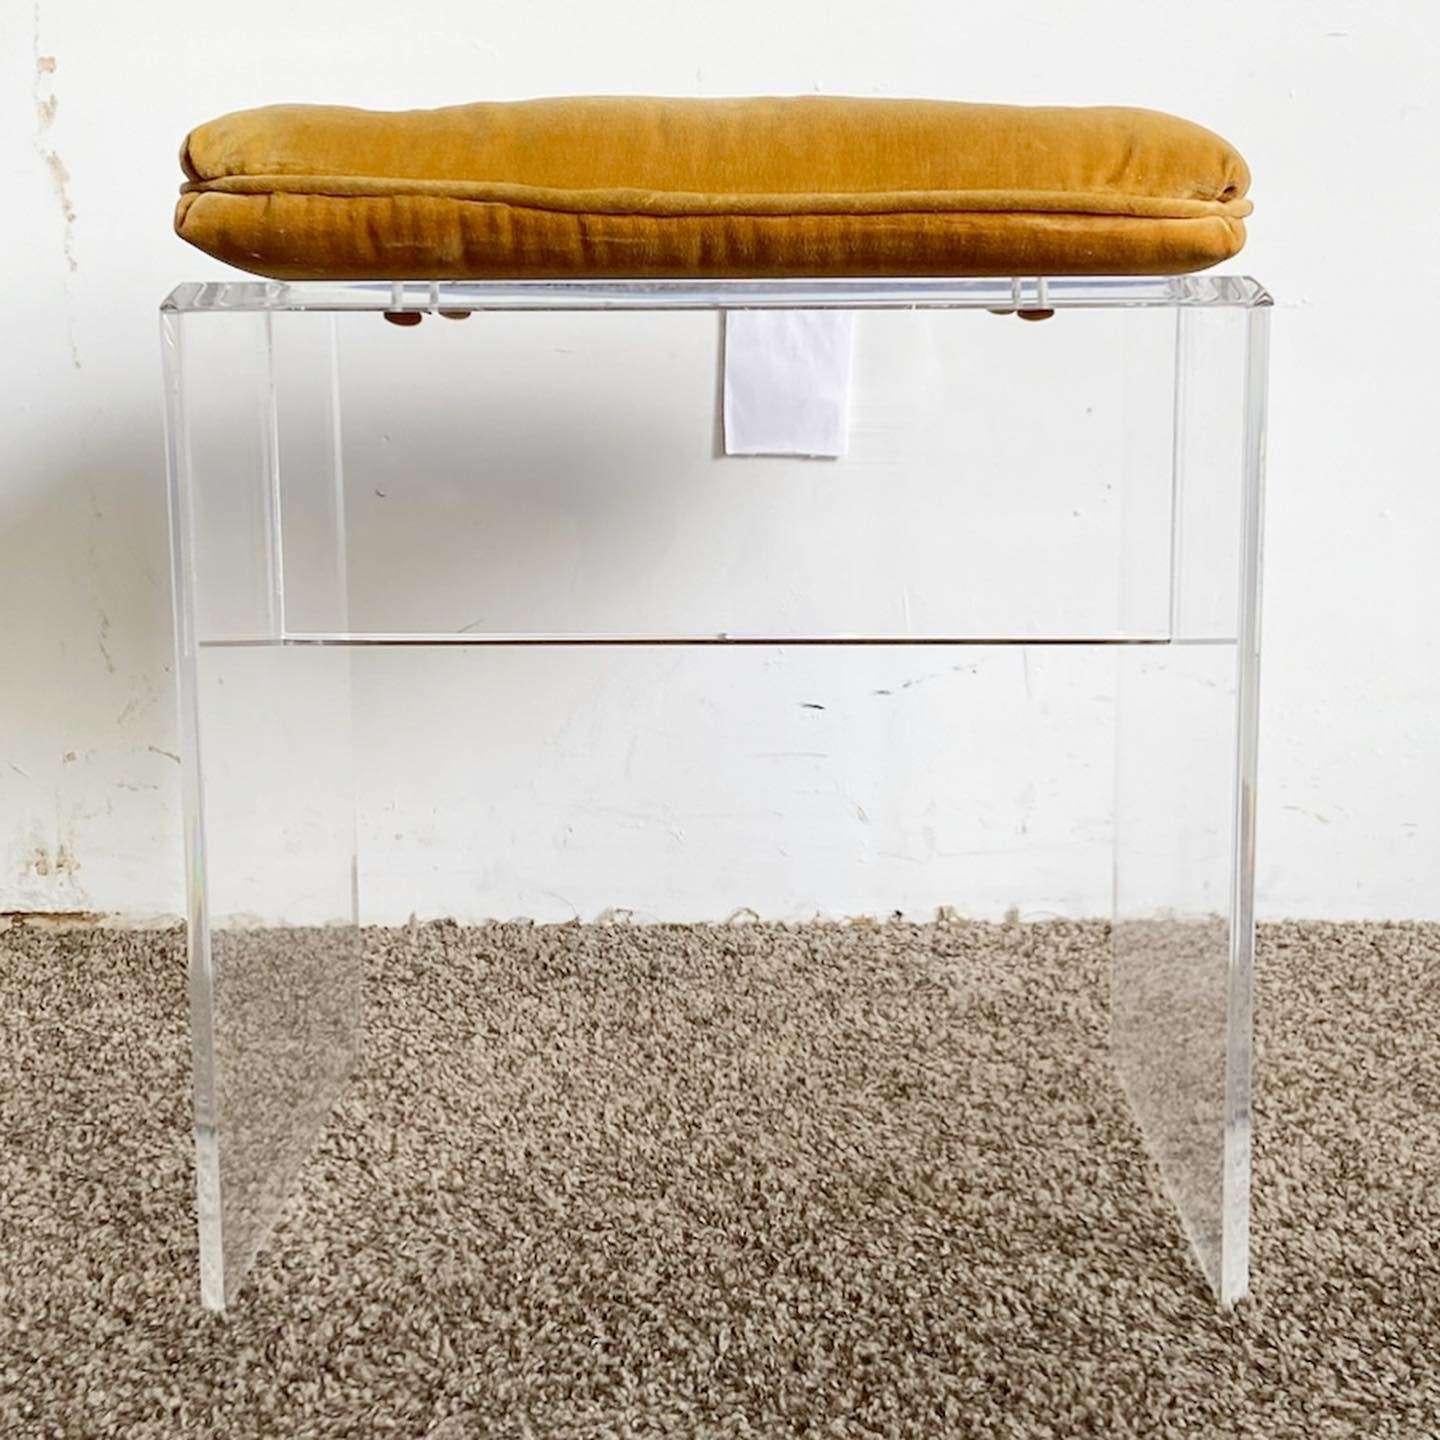 Far out vintage postmodern lucite low stool. Feature a burn orange tufted seat cushion.